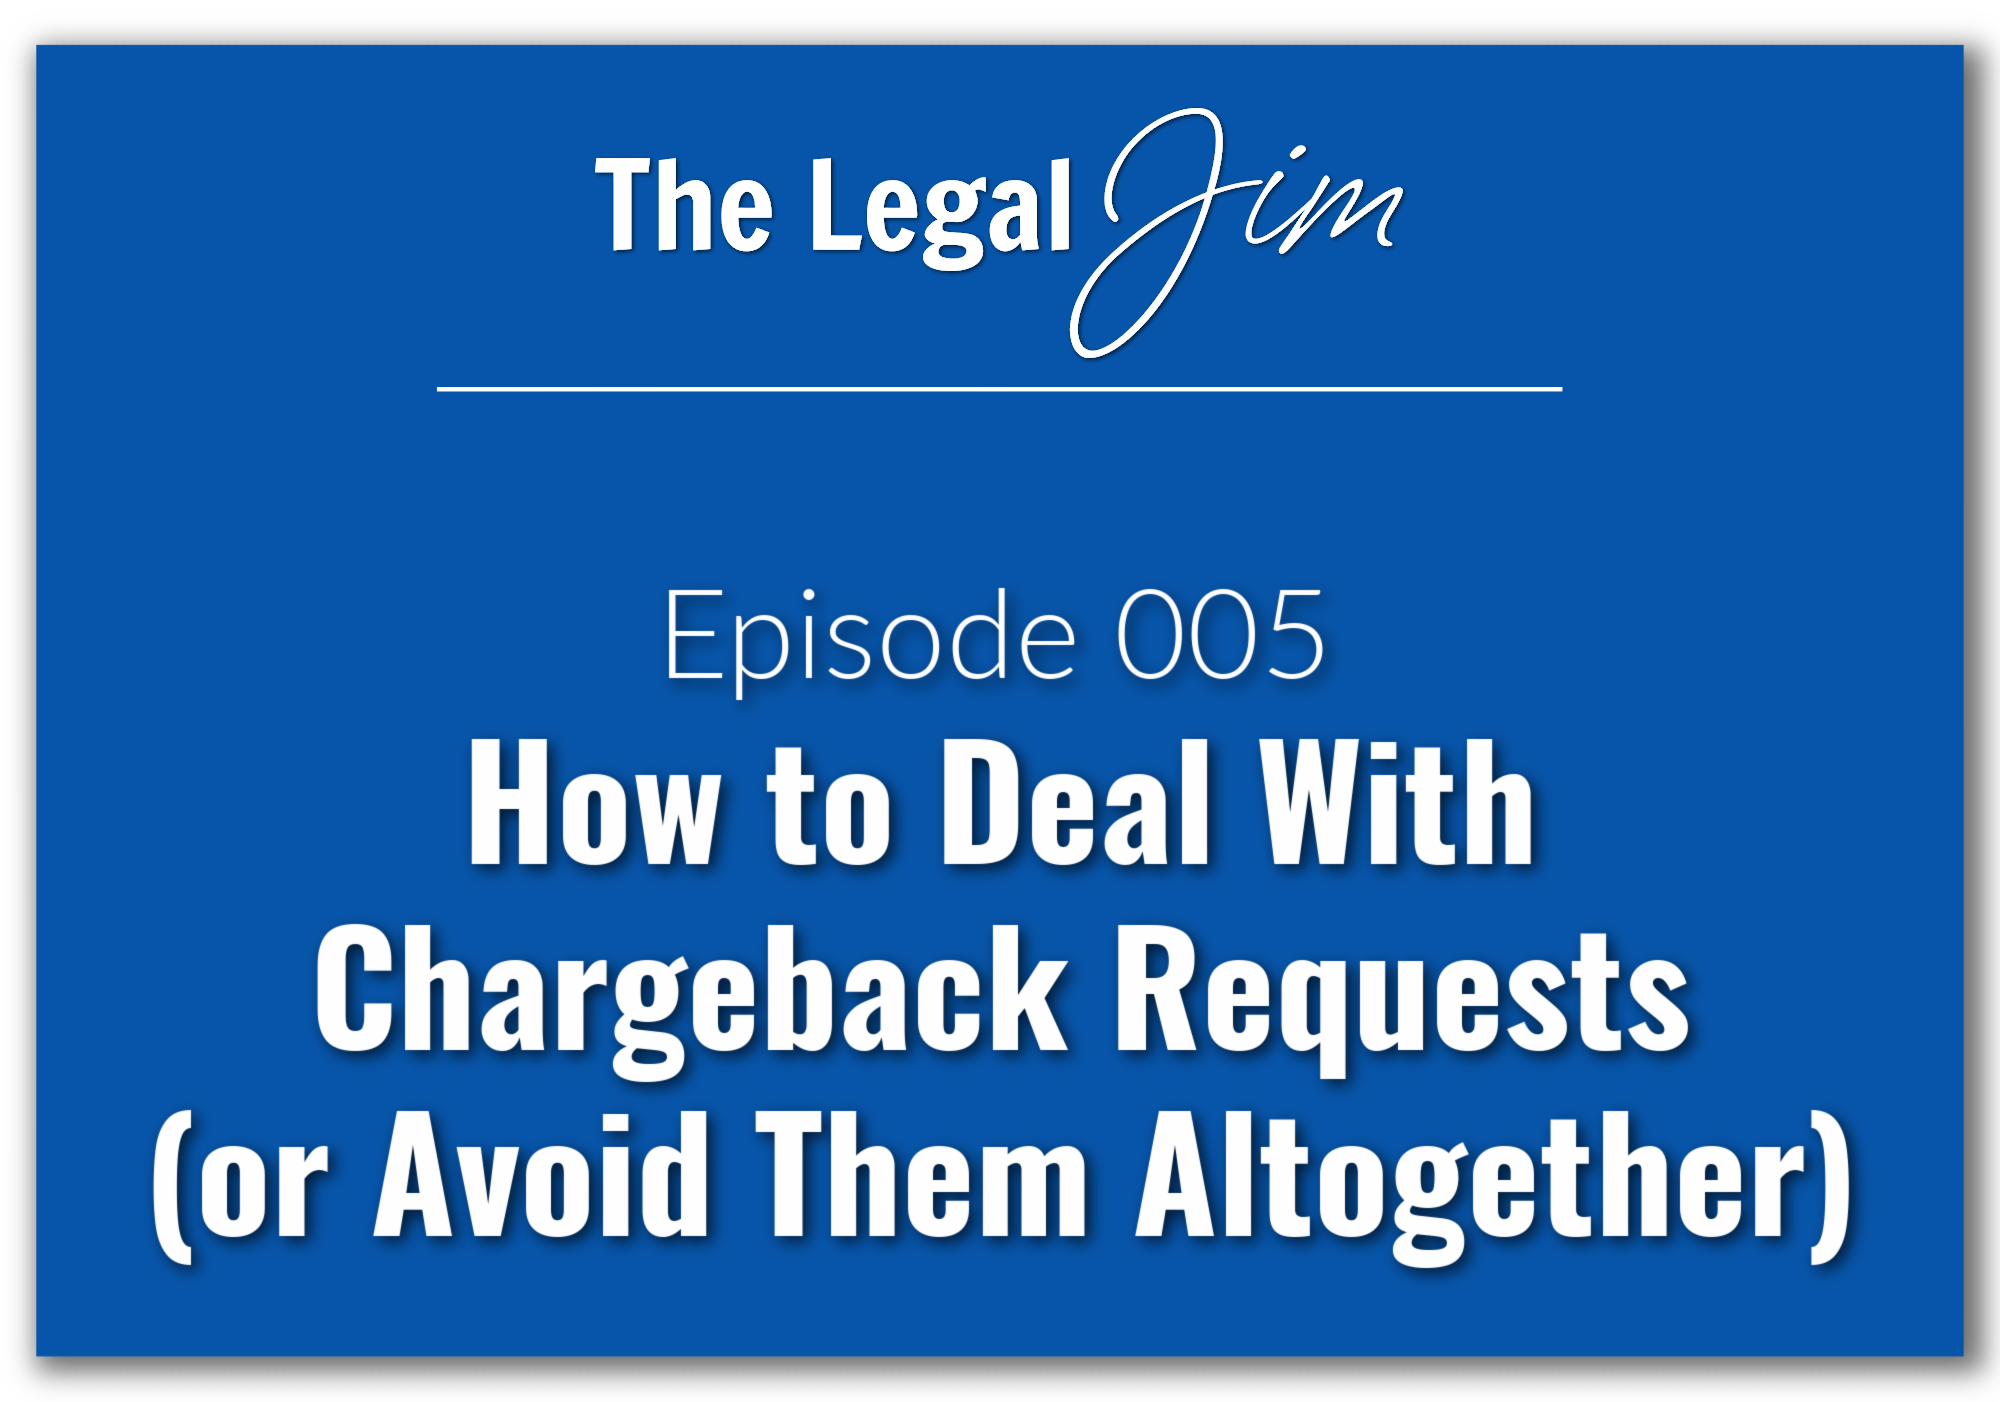 How to Deal With Chargeback Requests